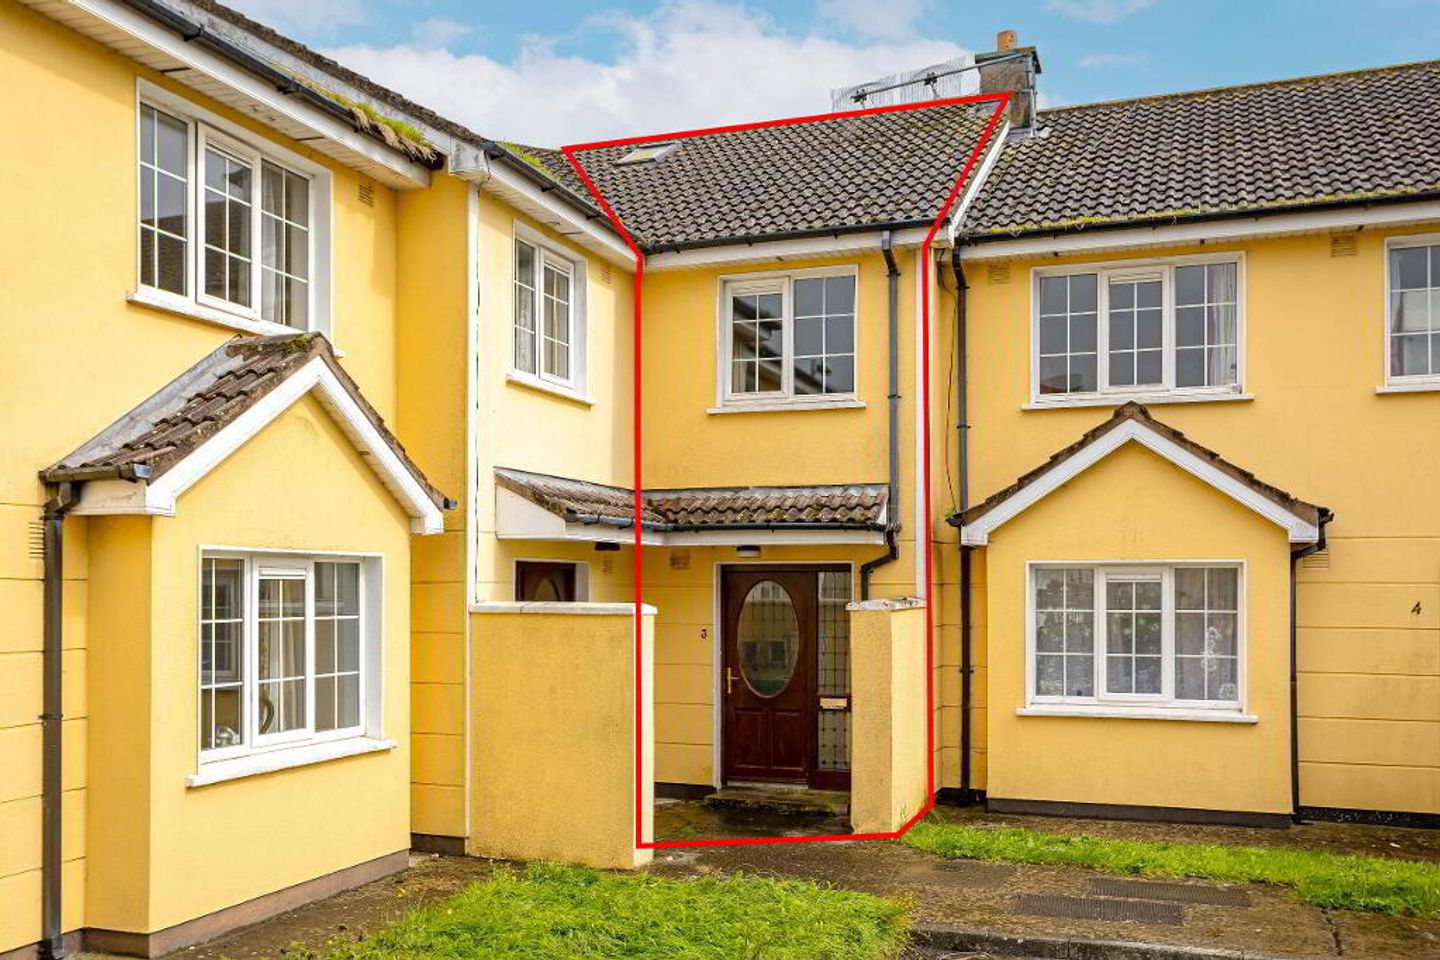 3 Holly Crescent, Templars Hall, Waterford City, Co. Waterford, X91FFH2